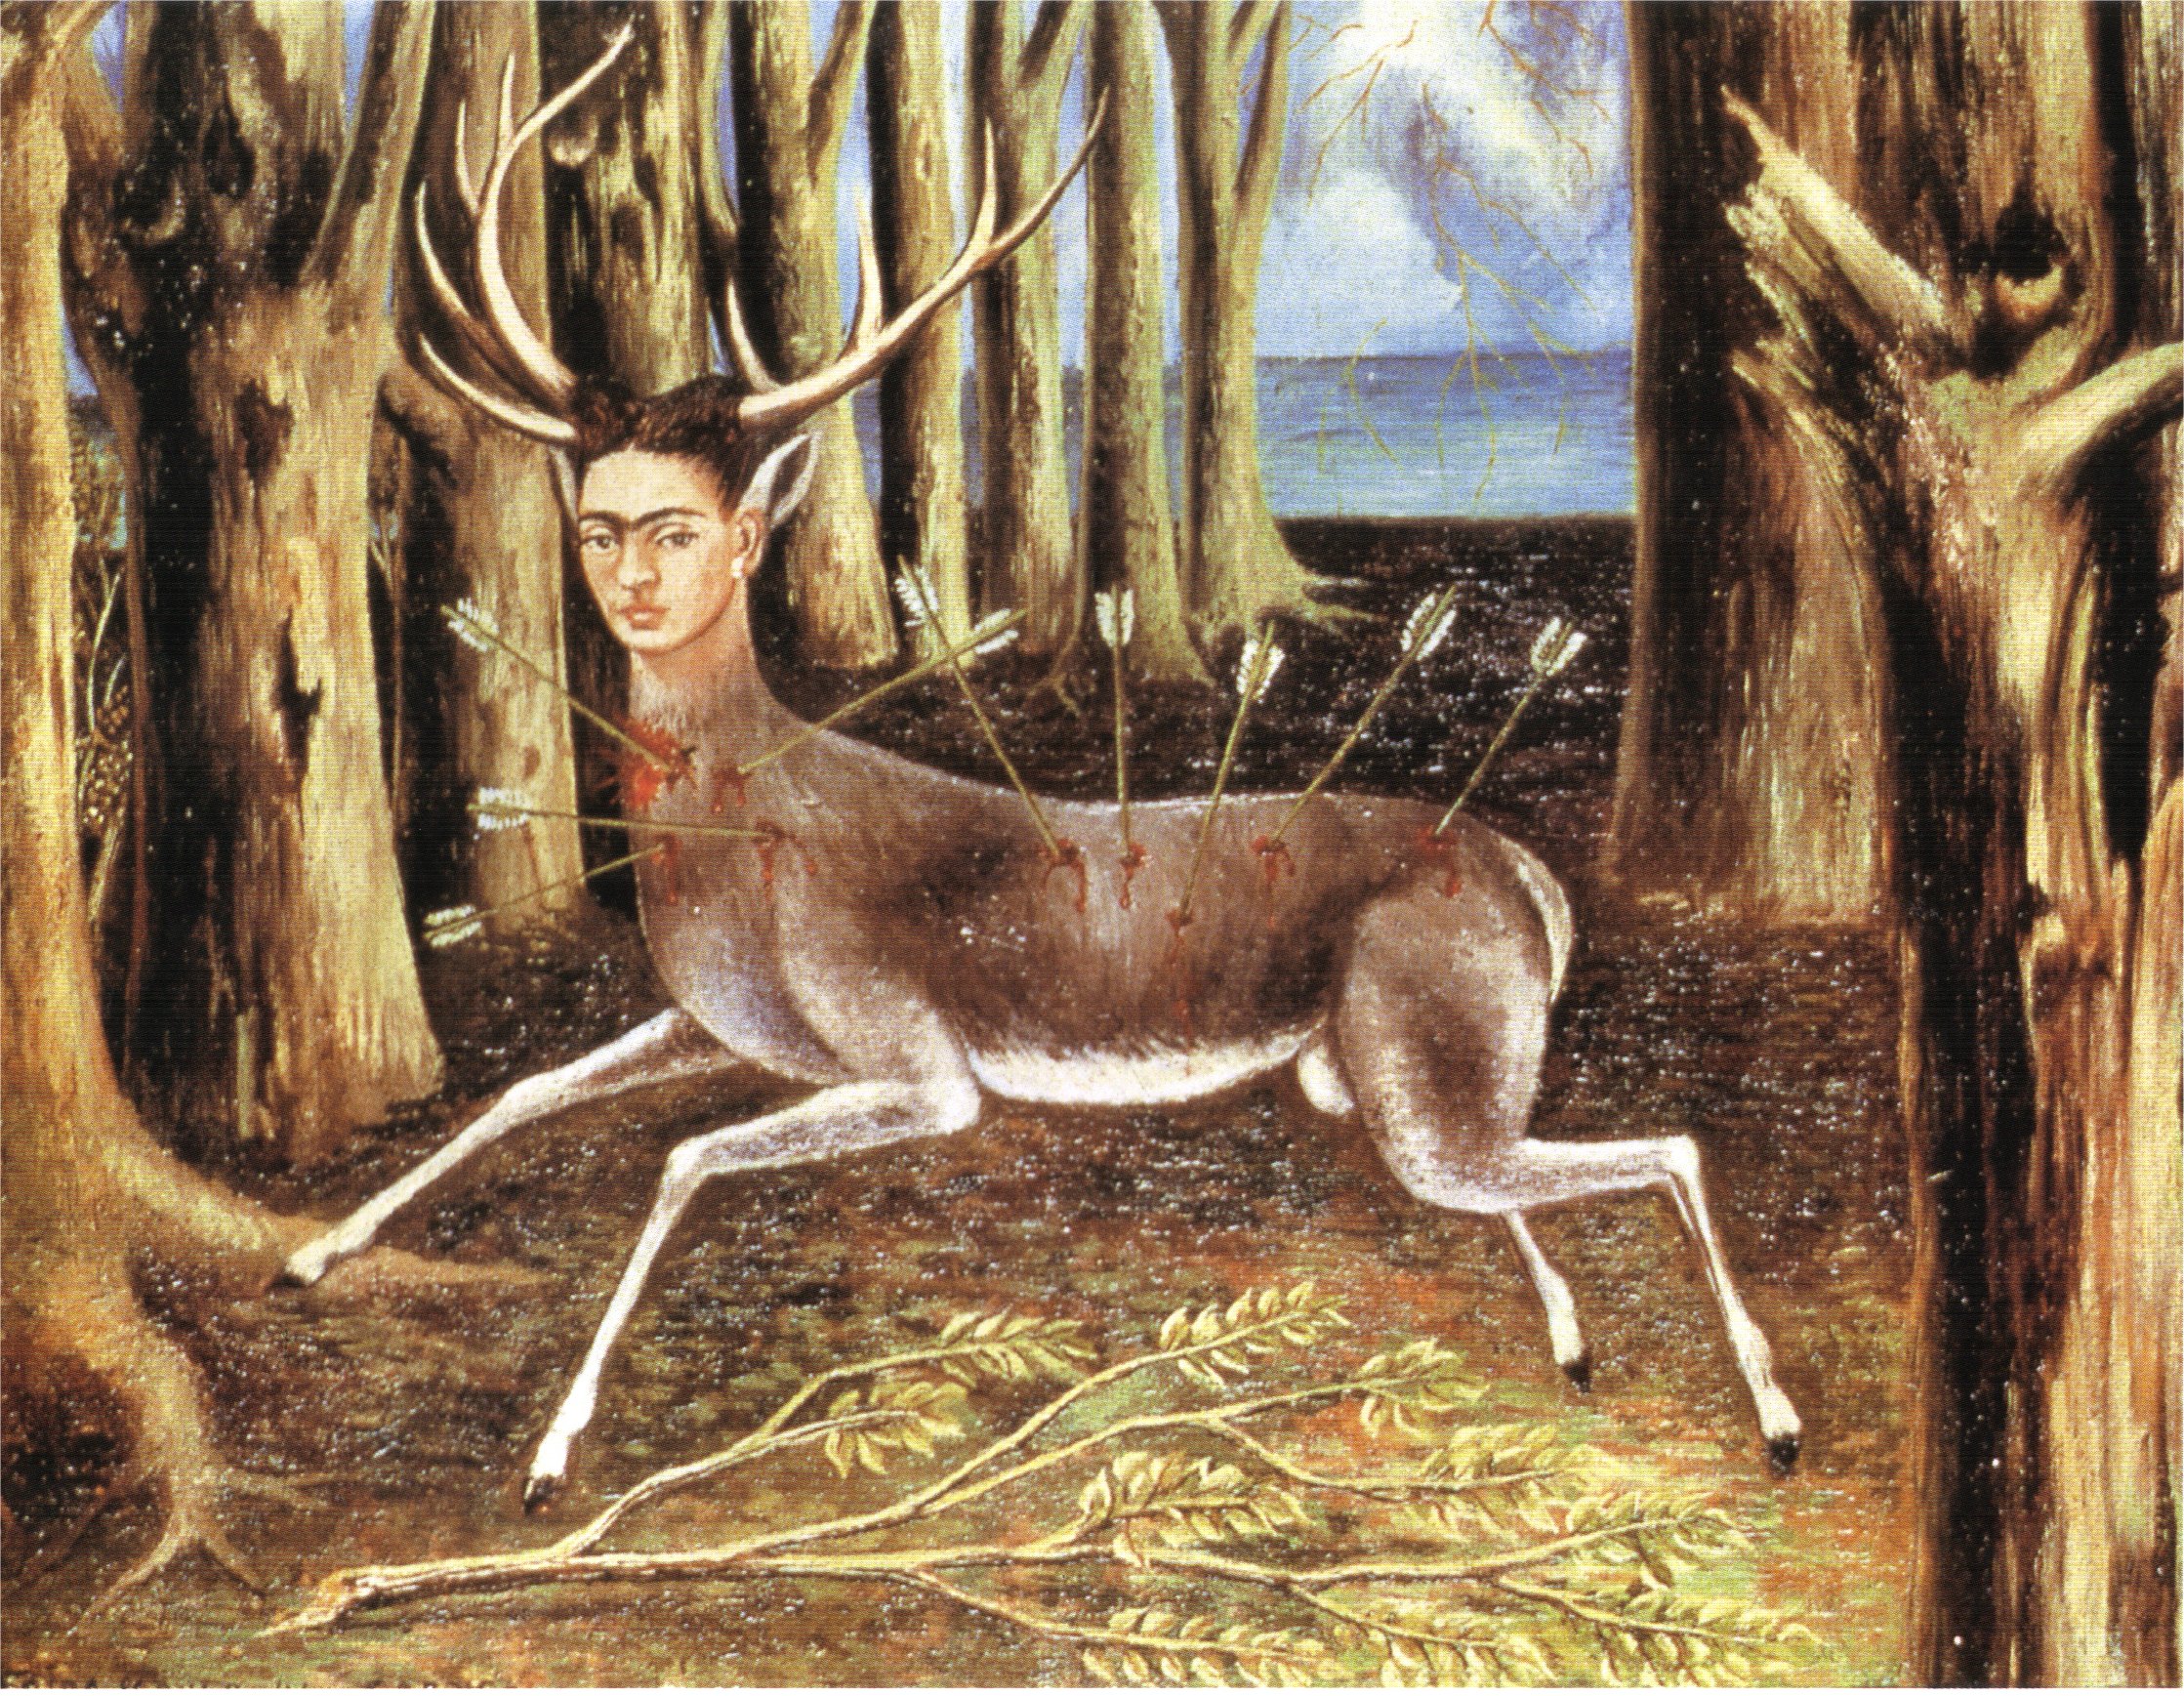 Wounded Deer by Frida Kahlo - 1946 - 22.4 x 30 cm private collection